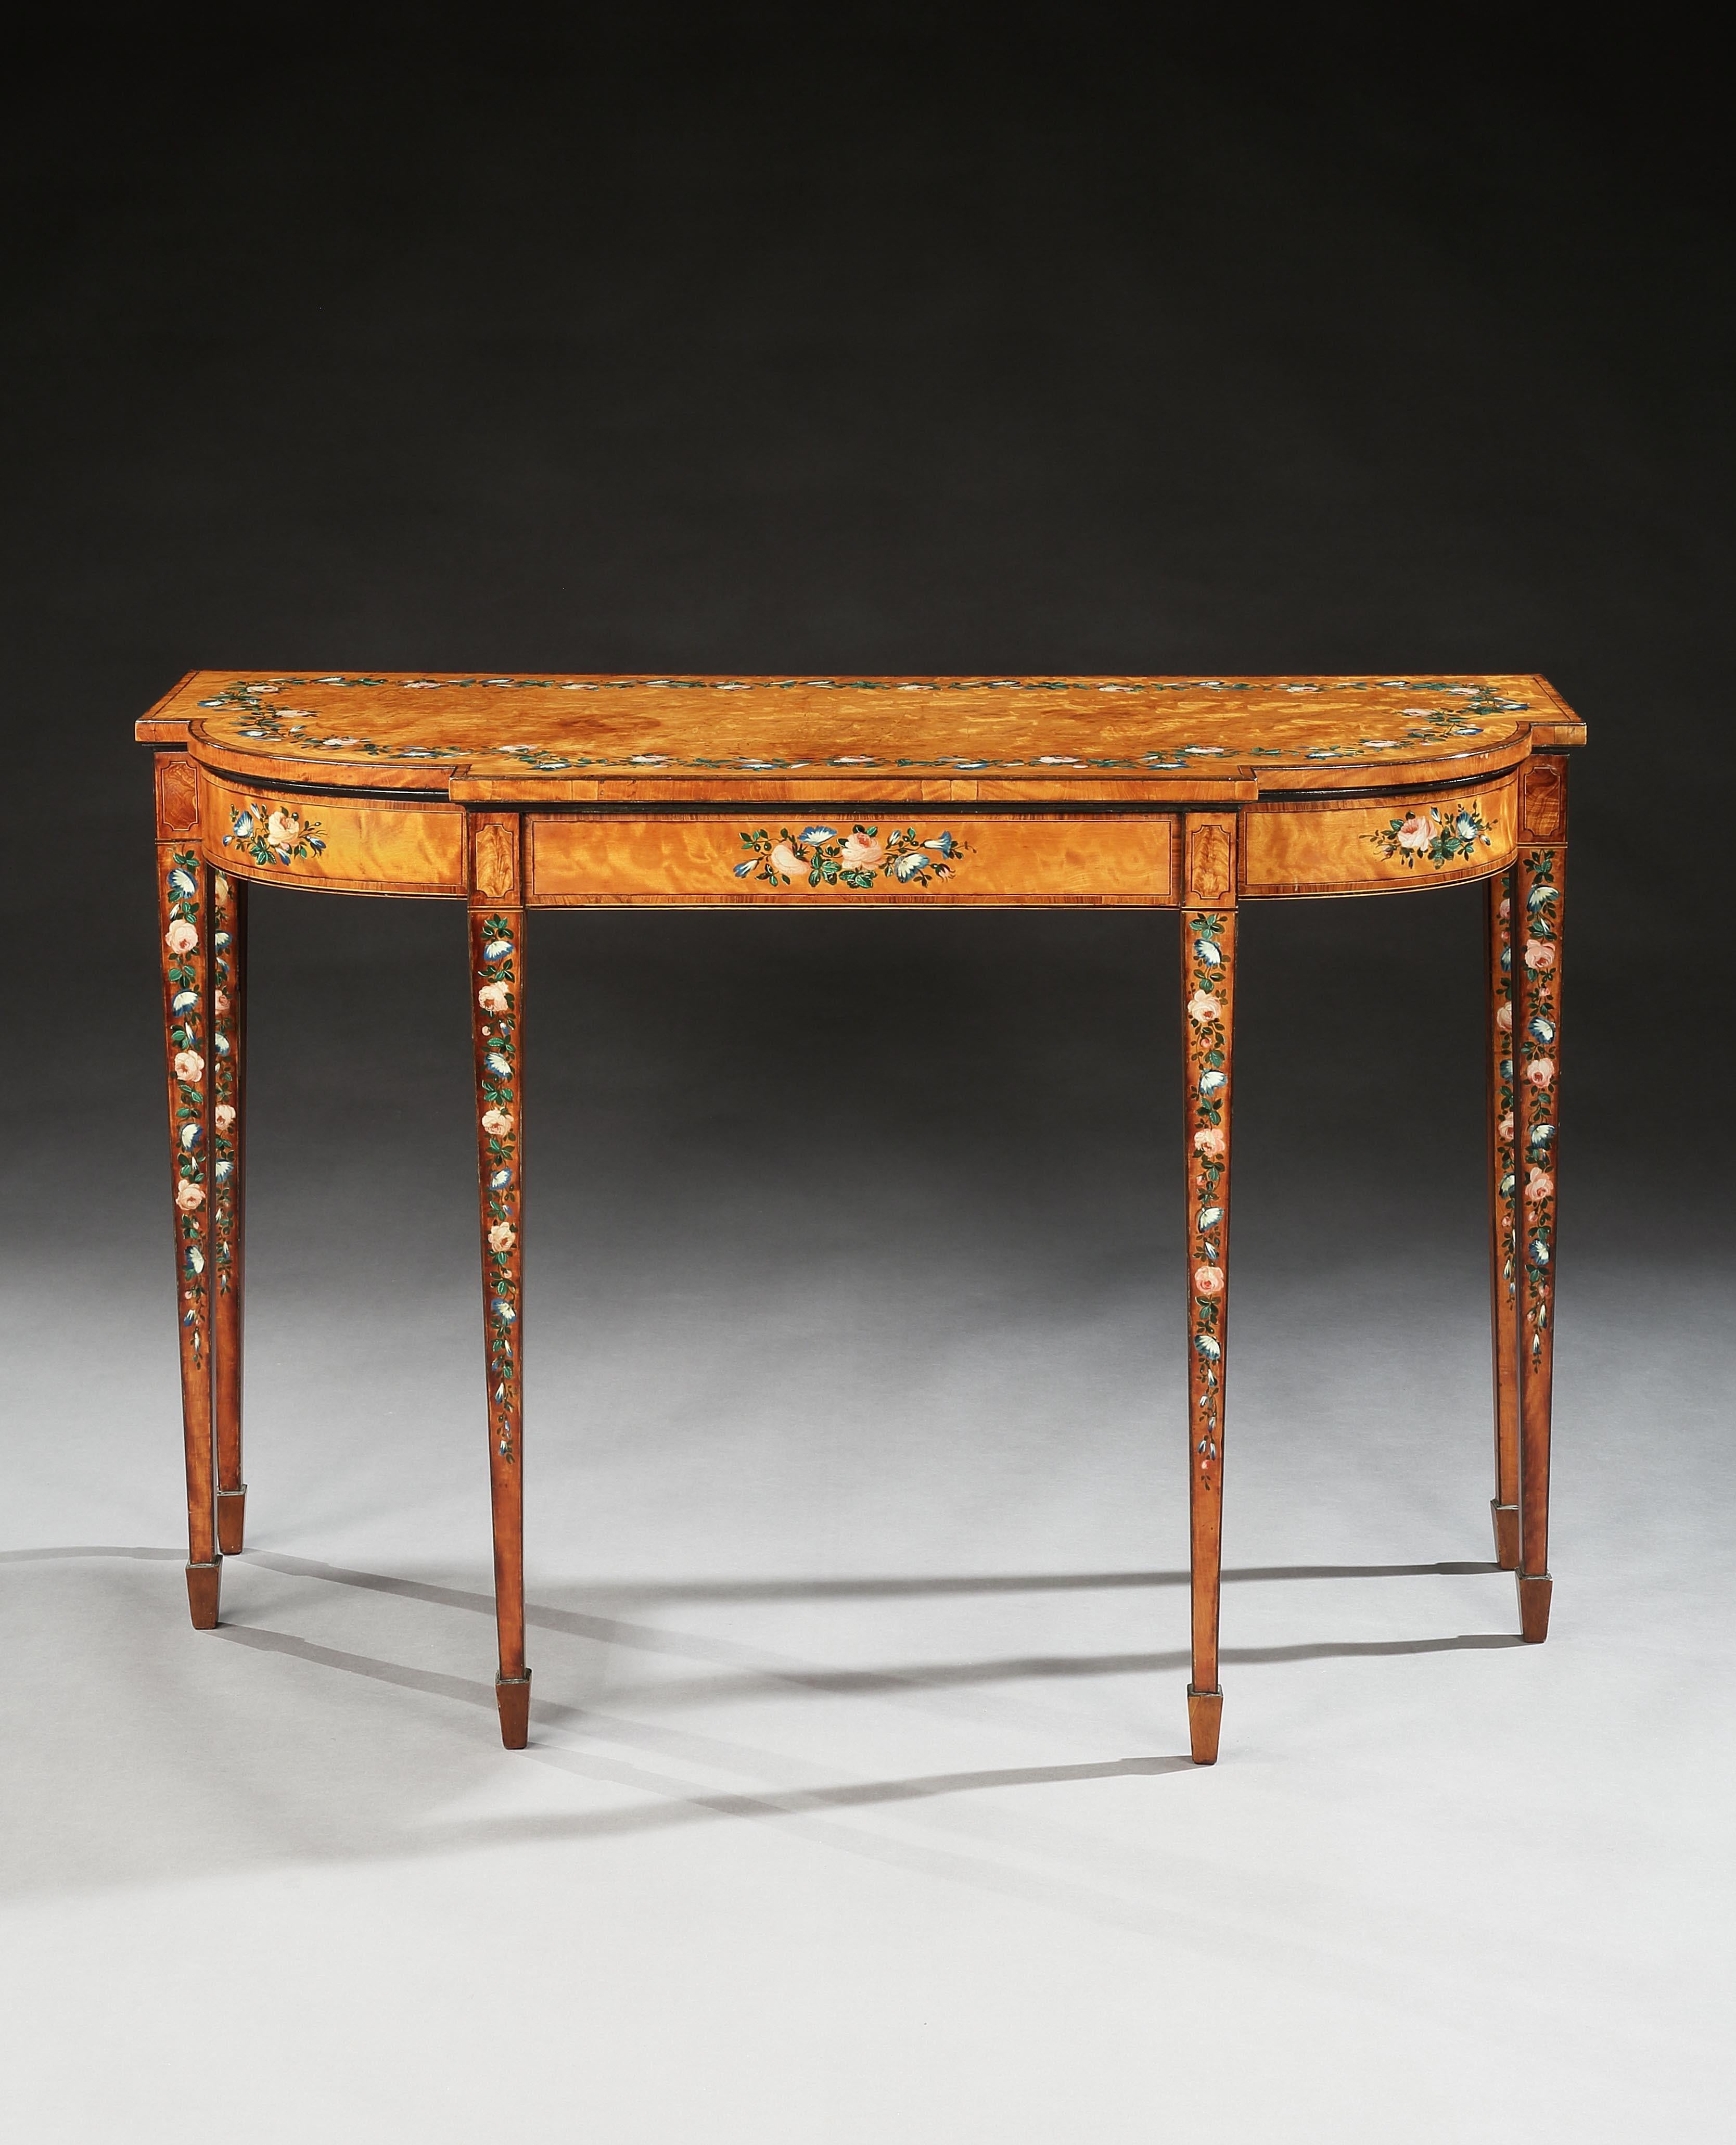 Hand-Painted 18th Century George III Sheraton Period Satinwood Console Table